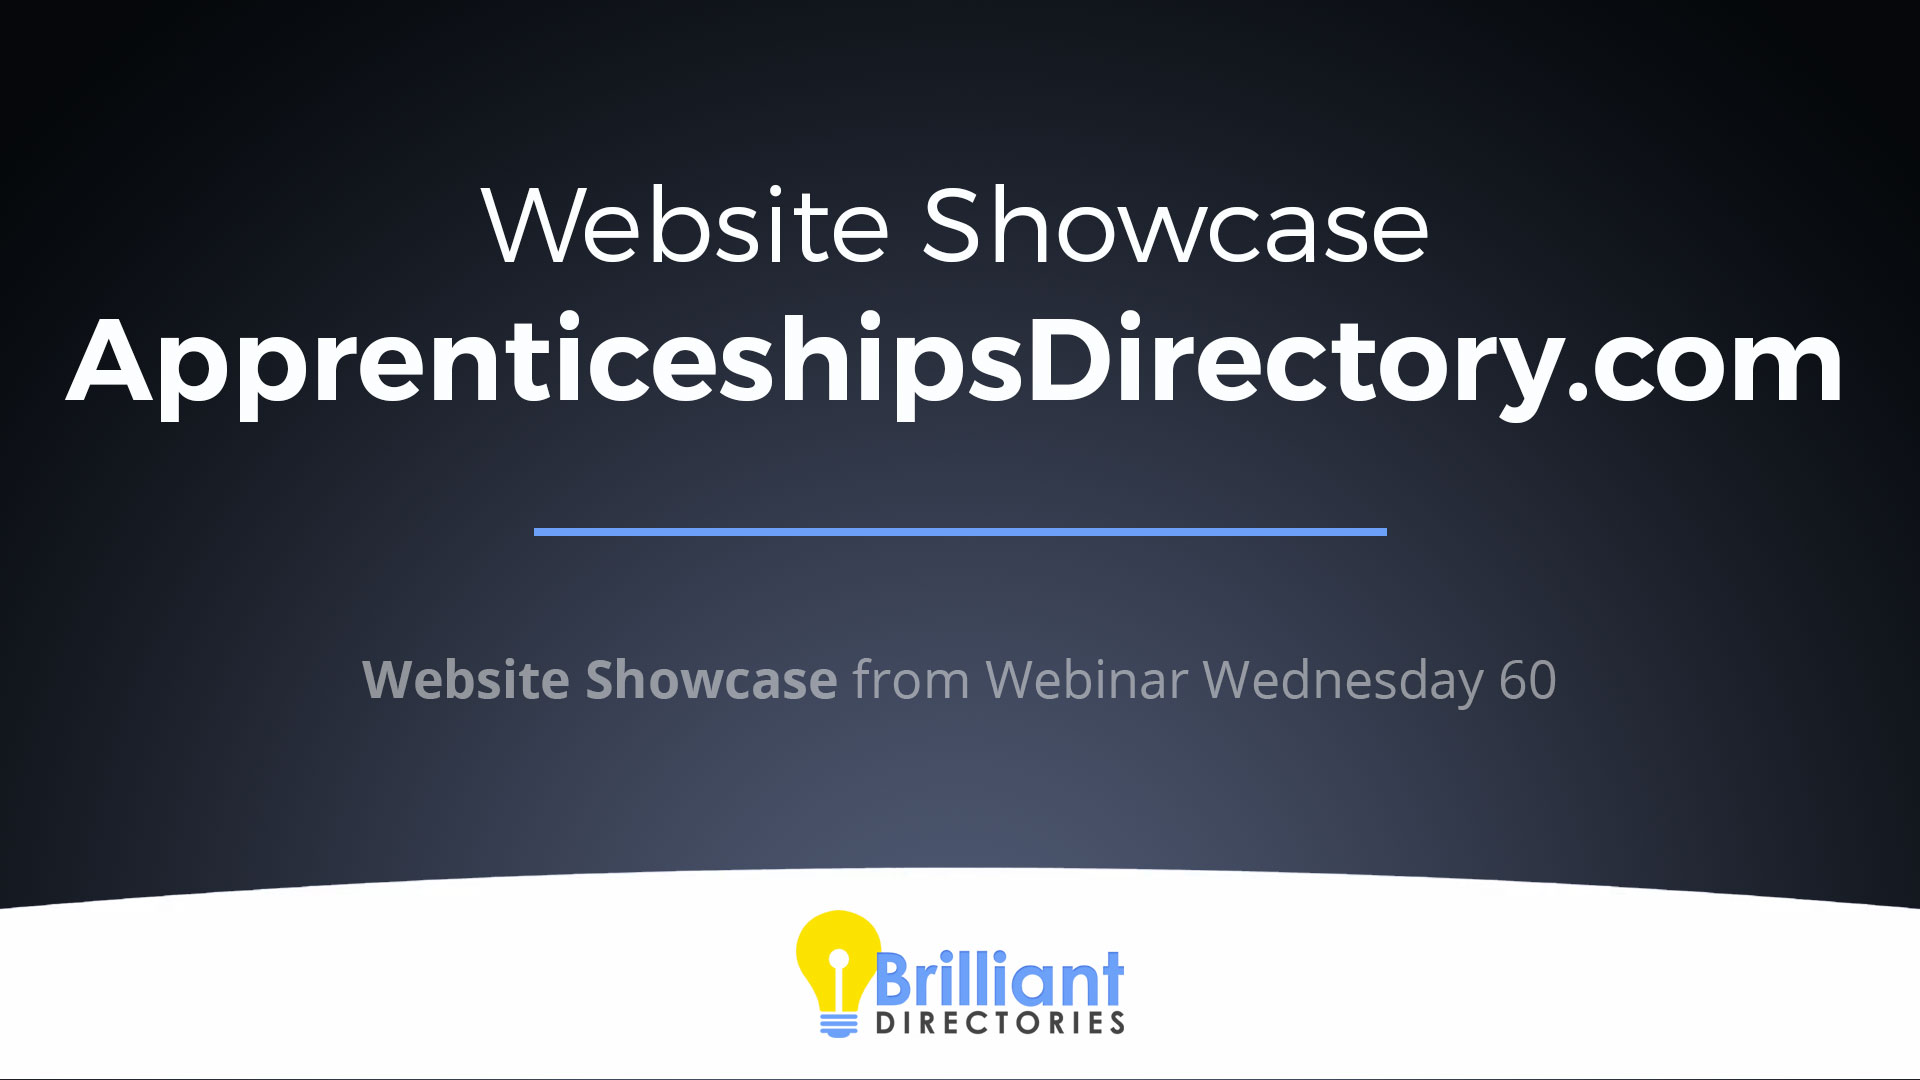 Case Study: Job Search Website powered by Brilliant Directories